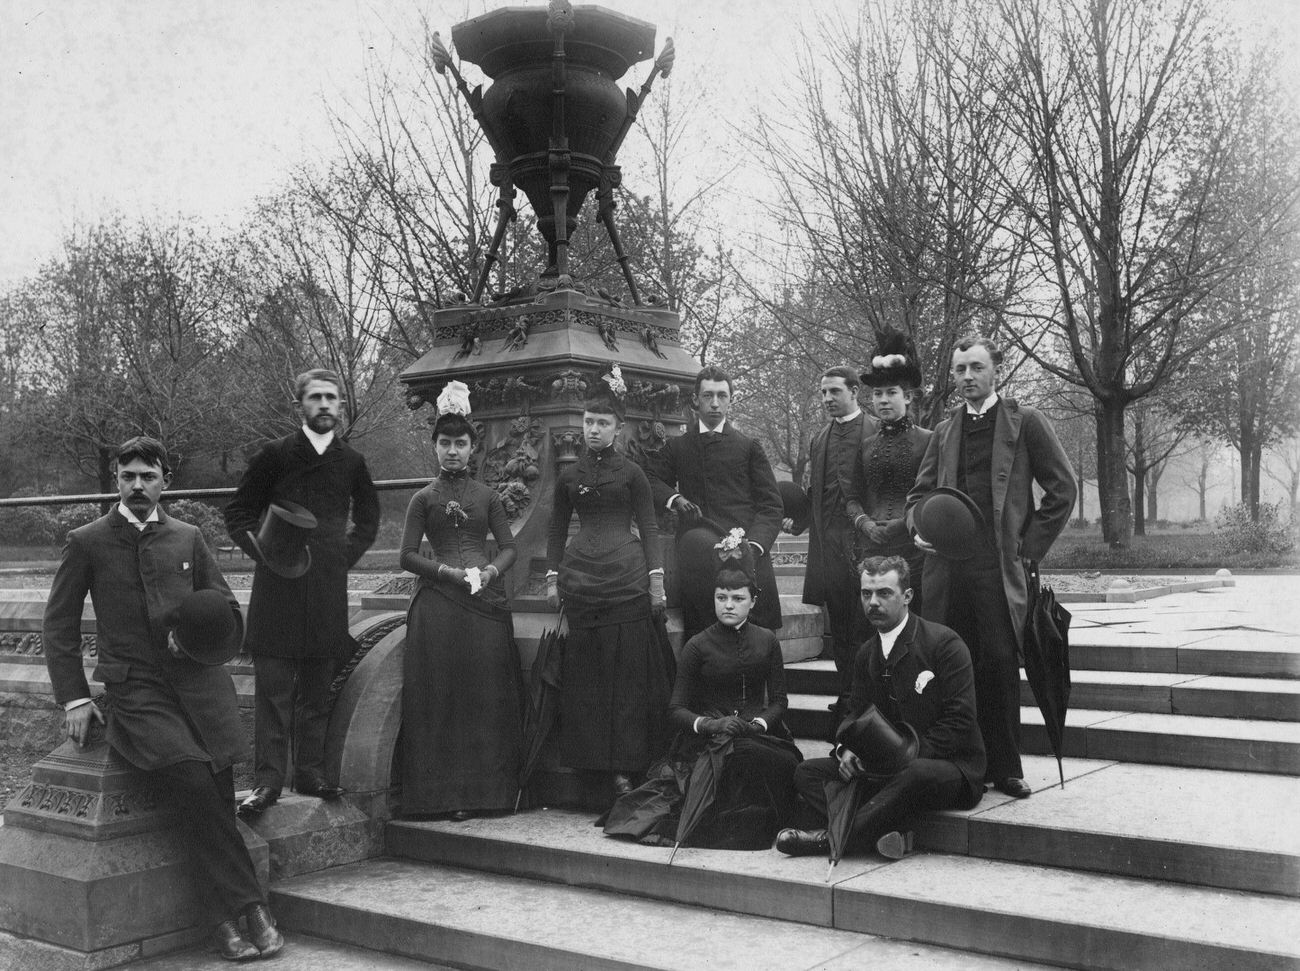 James Sheridan Hall And Friends By Ornamental Urn In Prospect Park, Brooklyn, 1895